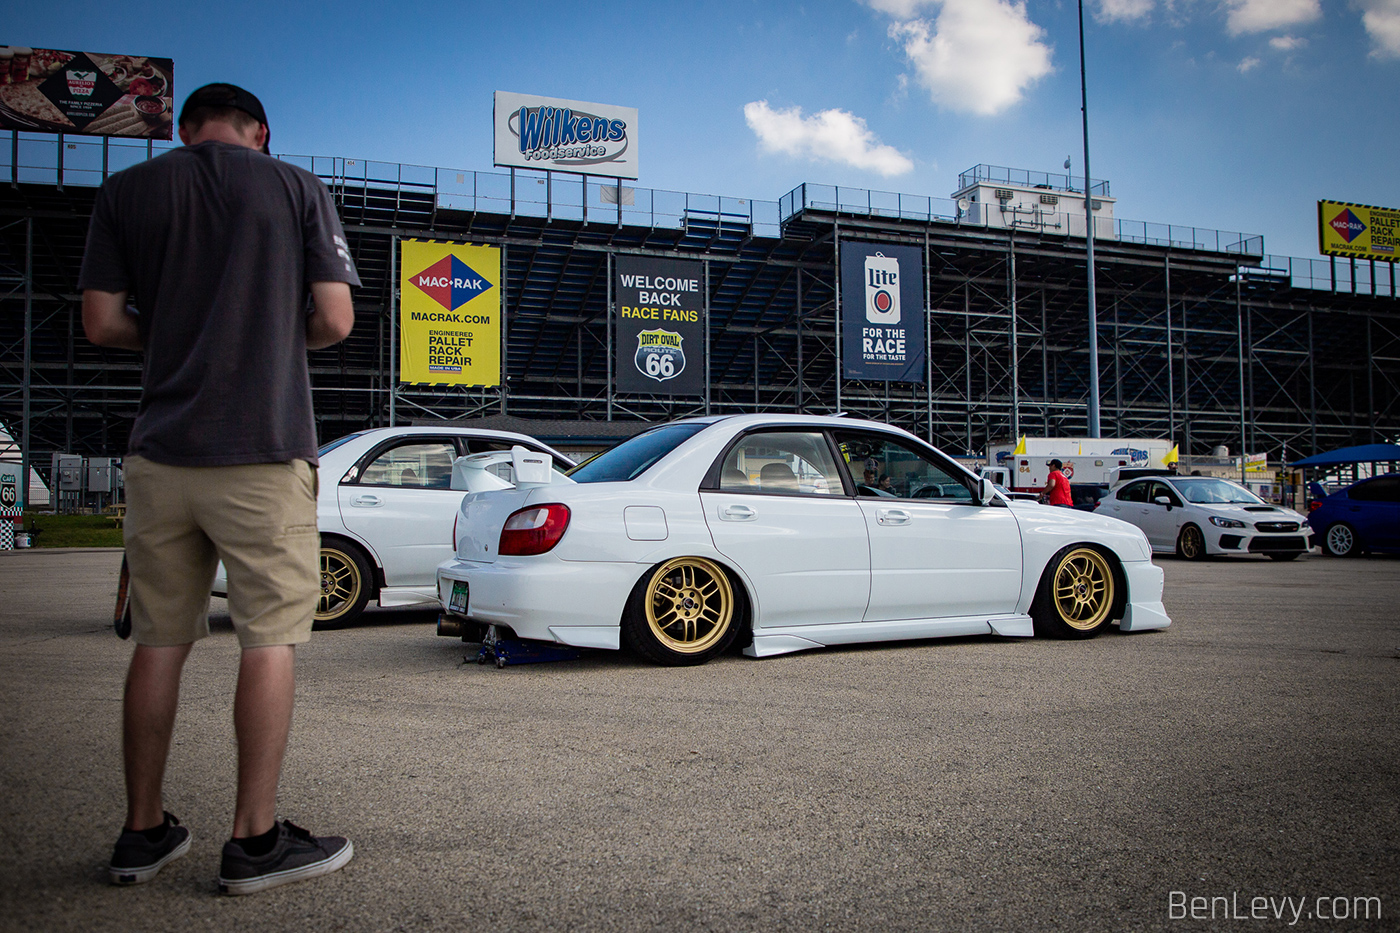 White Subarus at Subiefest Midwest 2021